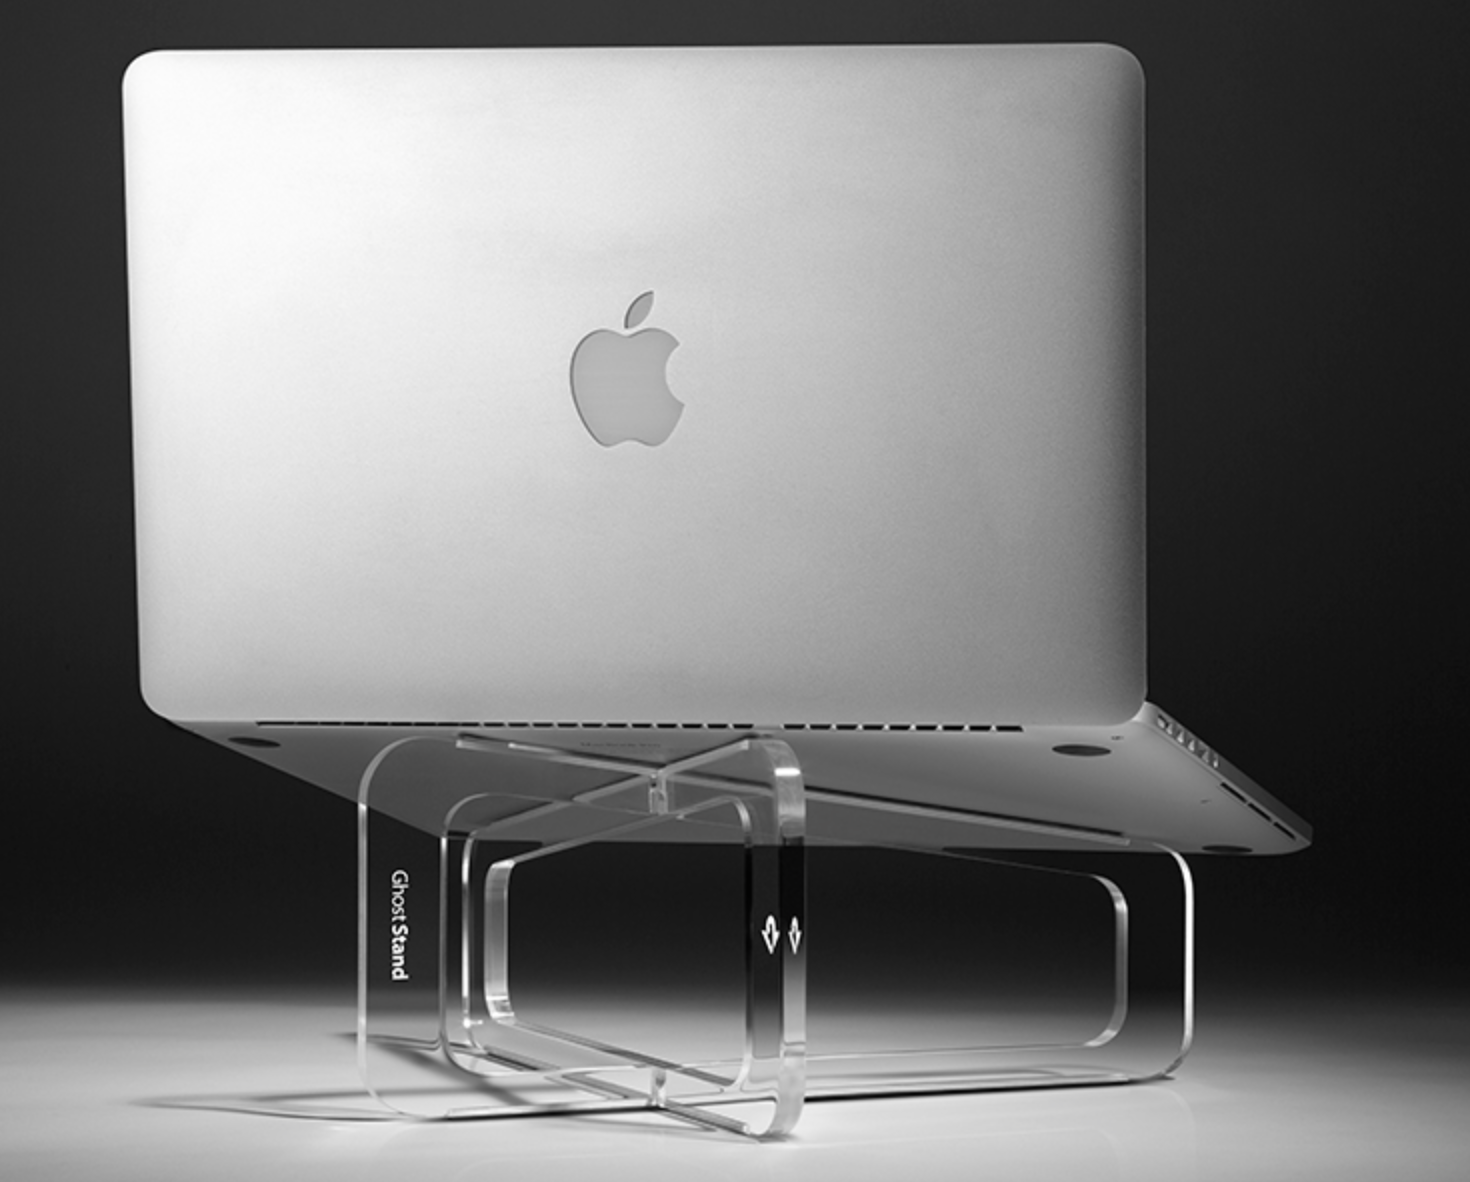 Twelve South HiRise Stand for MacBook